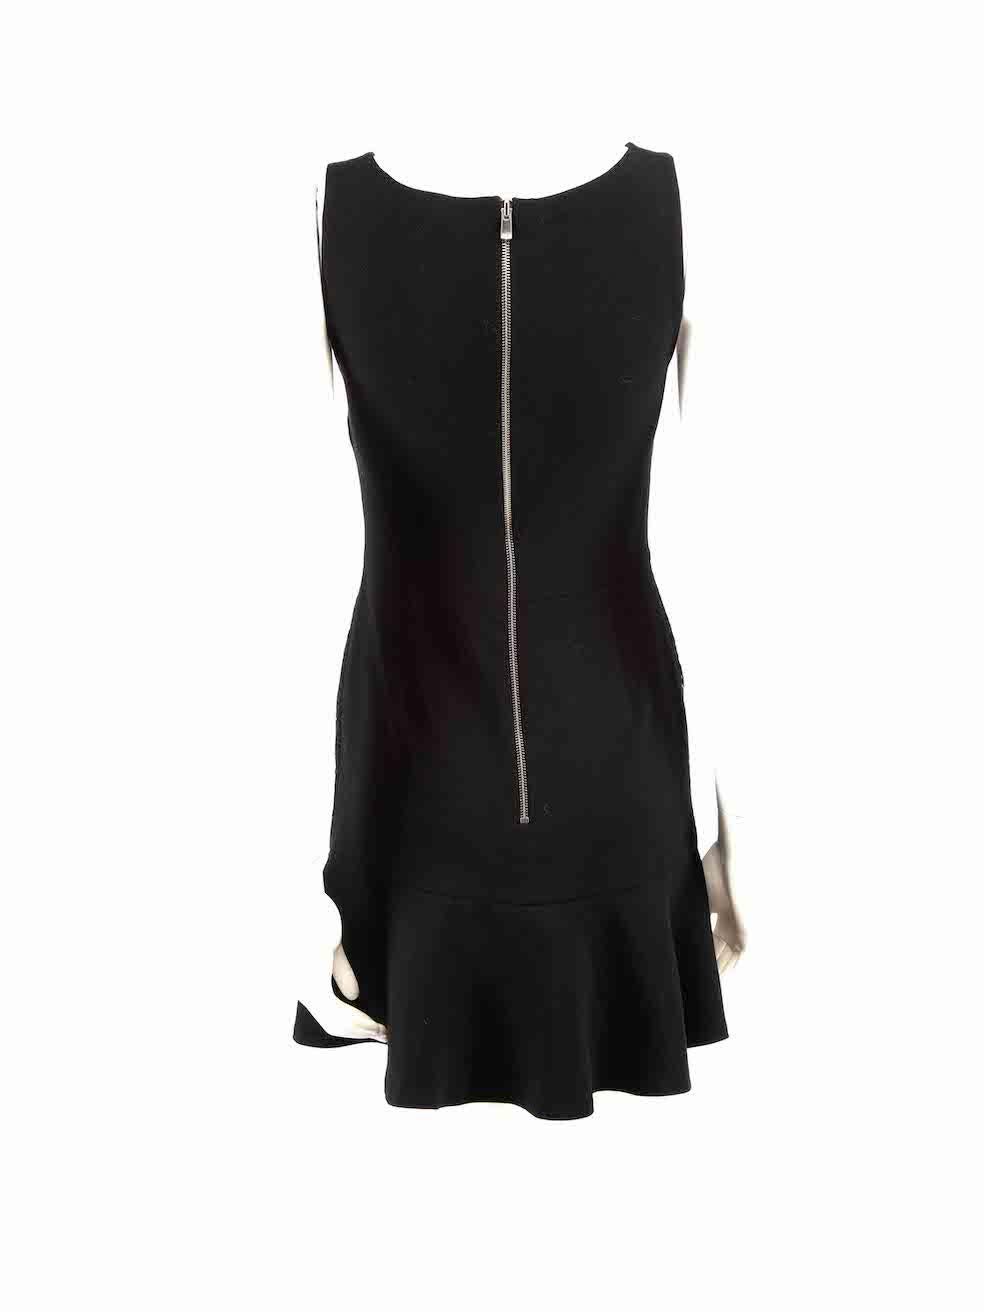 Sandro Black Lace Trim Mini Dress Size S In Good Condition For Sale In London, GB